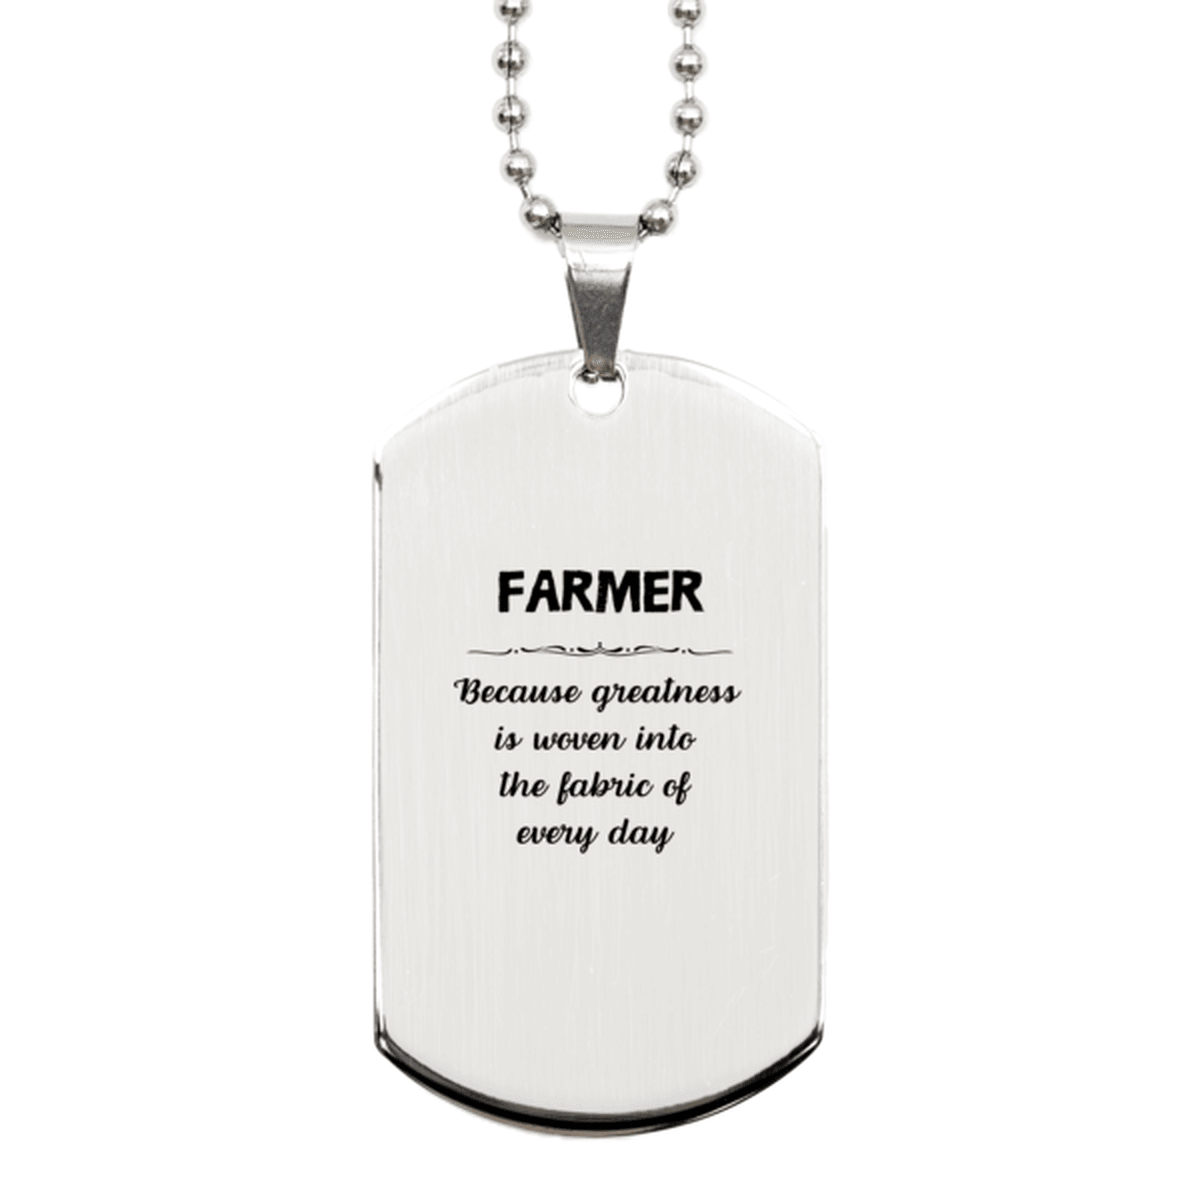 Sarcastic Farmer Silver Dog Tag Gifts, Christmas Holiday Gifts for Farmer Birthday, Farmer: Because greatness is woven into the fabric of every day, Coworkers, Friends - Mallard Moon Gift Shop